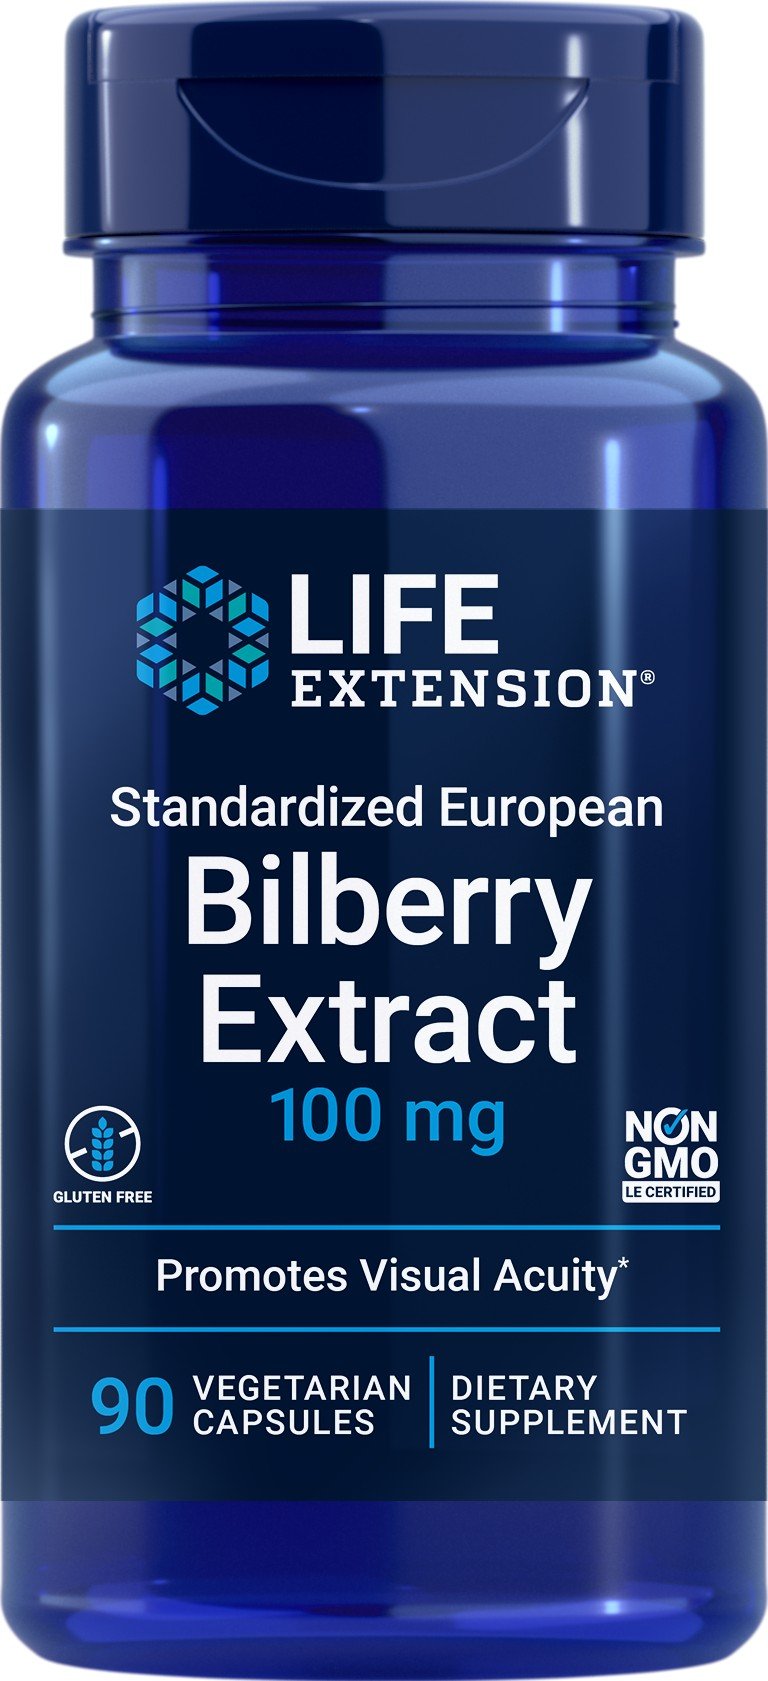 Life Extension Bilberry Extract-100 mg 90 Vegetarian Capsules